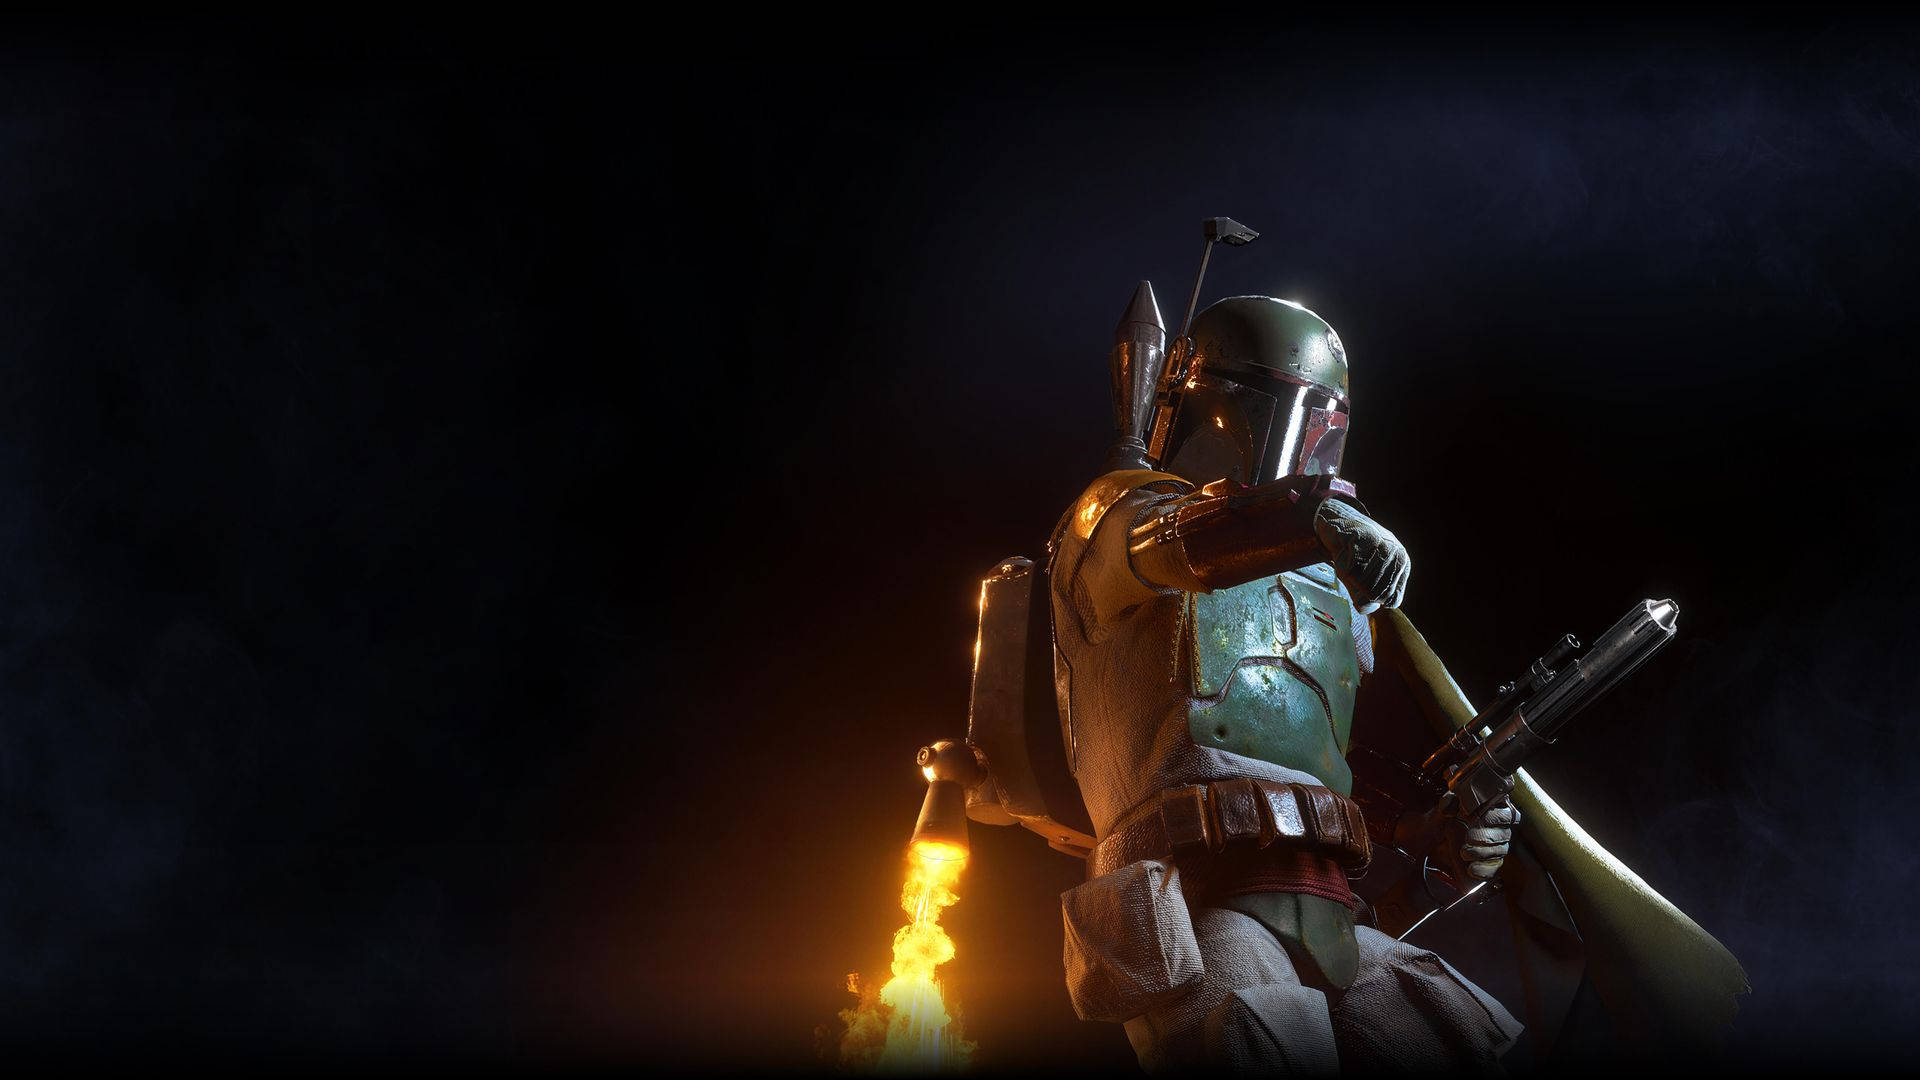 Boba Fett, the iconic bounty hunter from the Star Wars franchise, strikes a menacing pose with his jetpack ready to deploy. Wallpaper